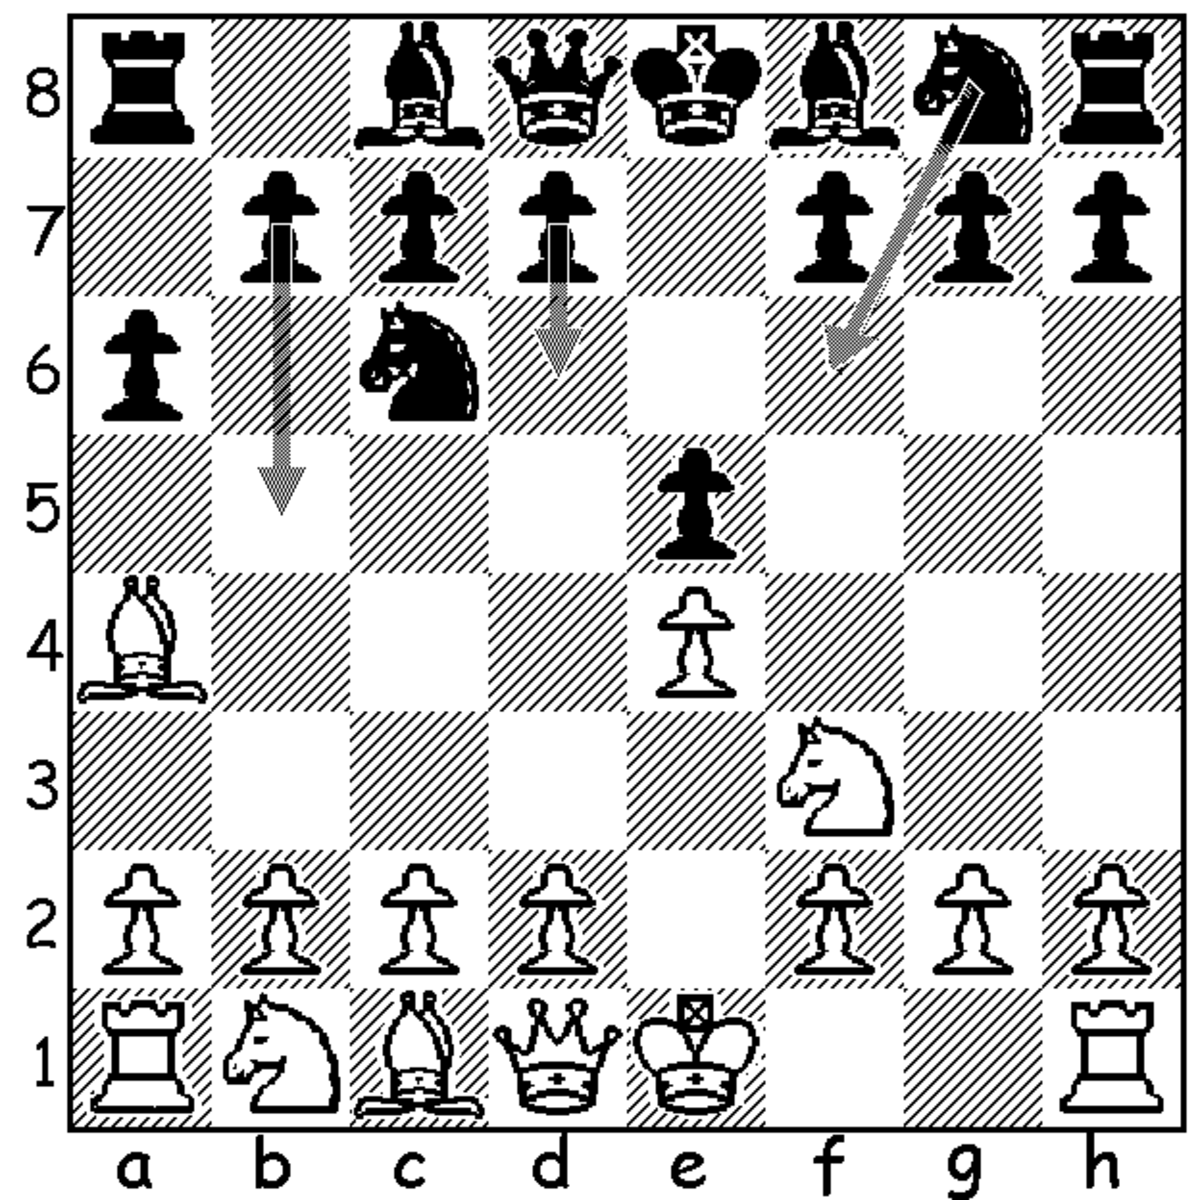 Chess Openings: Play Simply and Solidly as White in the Ruy Lopez with 6.d3  (The Martinez Variation) - HubPages